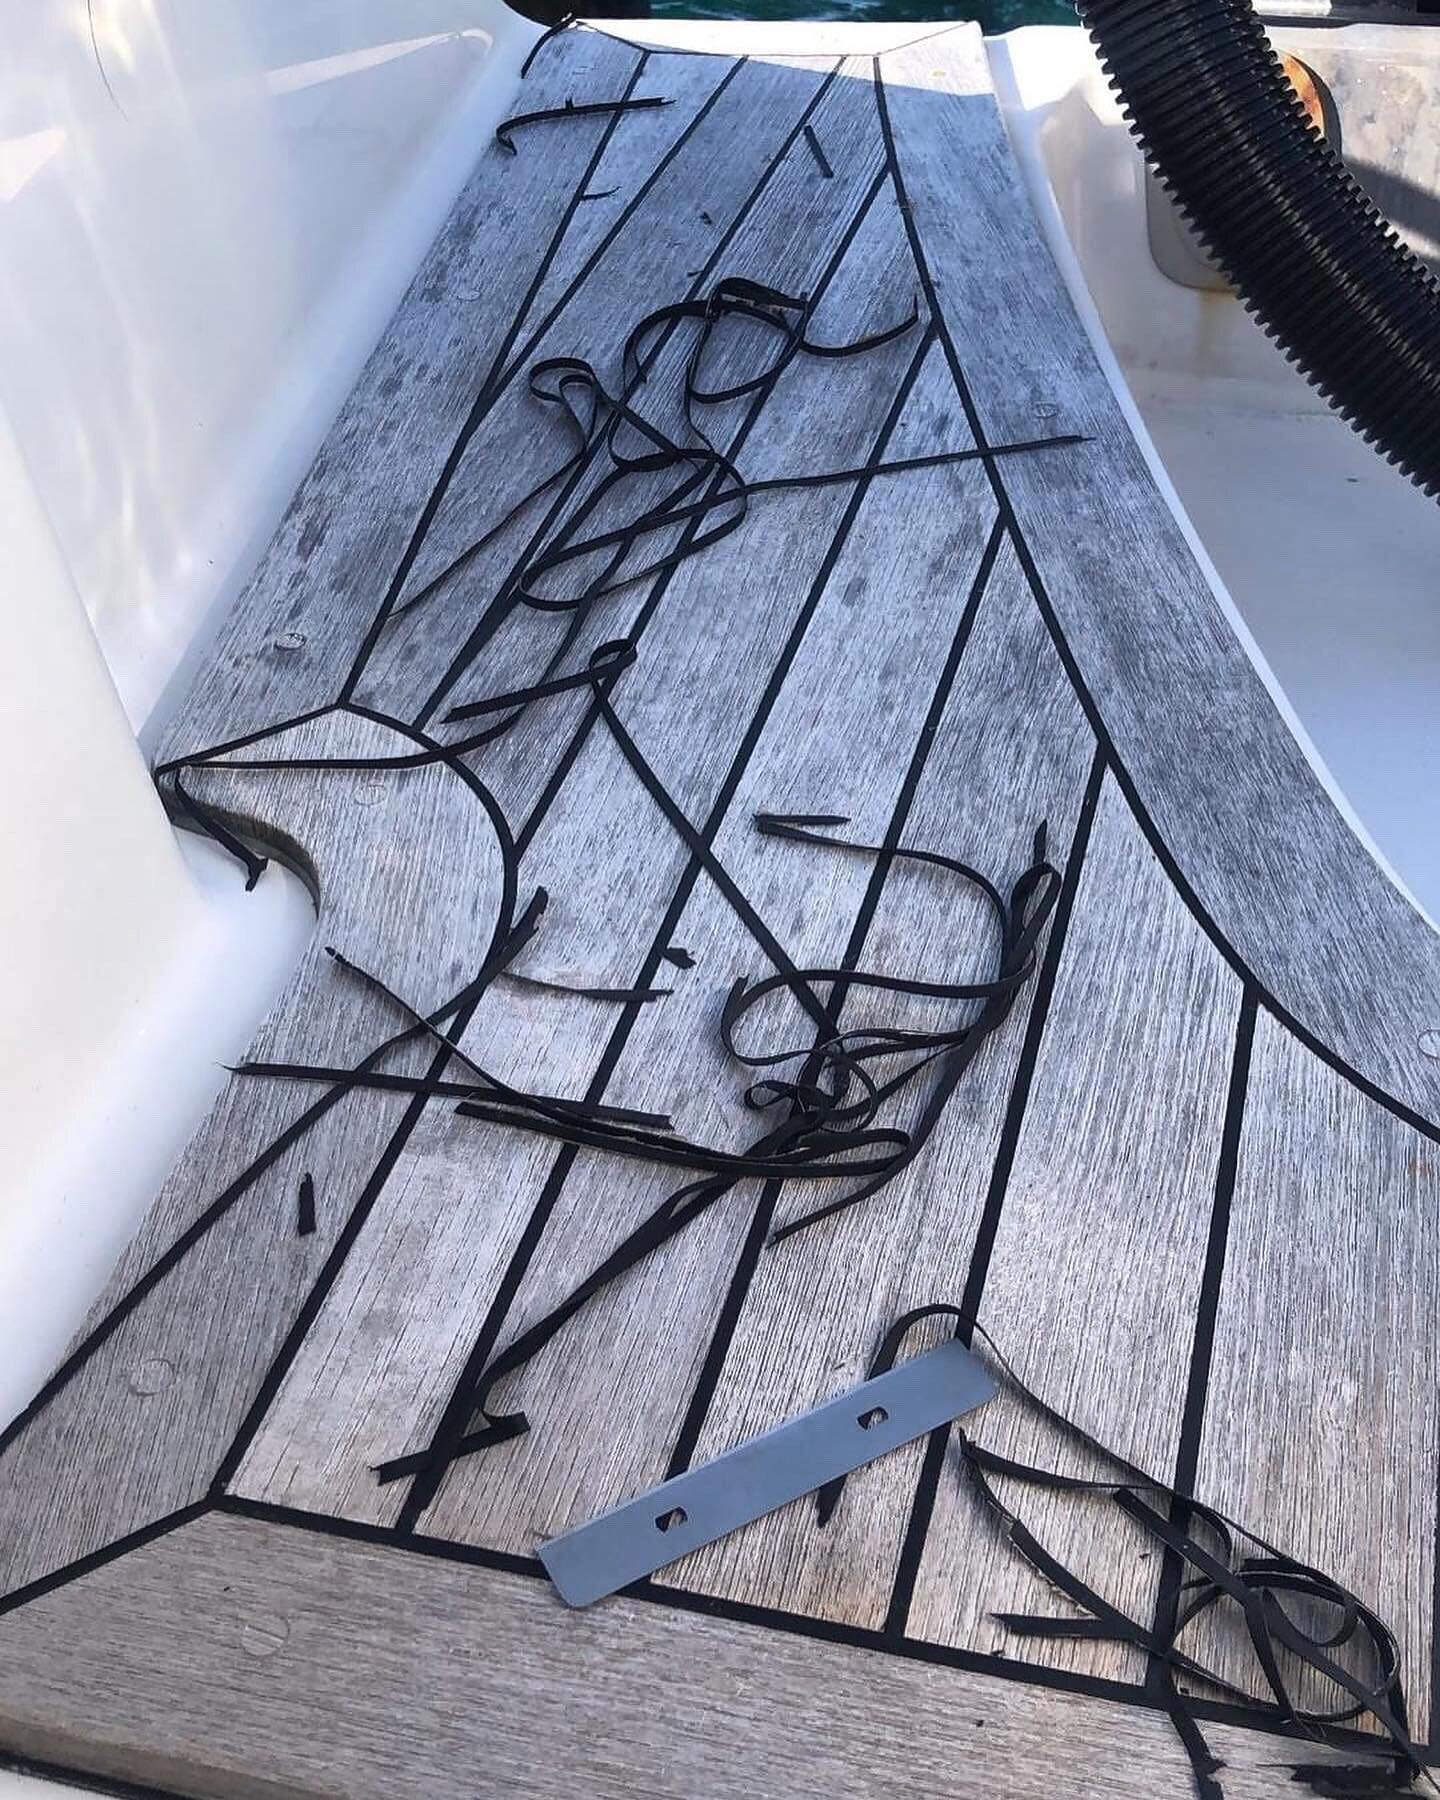 Proud caulking in your deck seams will lead to failure and water intrusion. Have your deck periodically serviced to keep it performing as it should. Call us today! 🧤💫🛥🛳 #teamteakworks